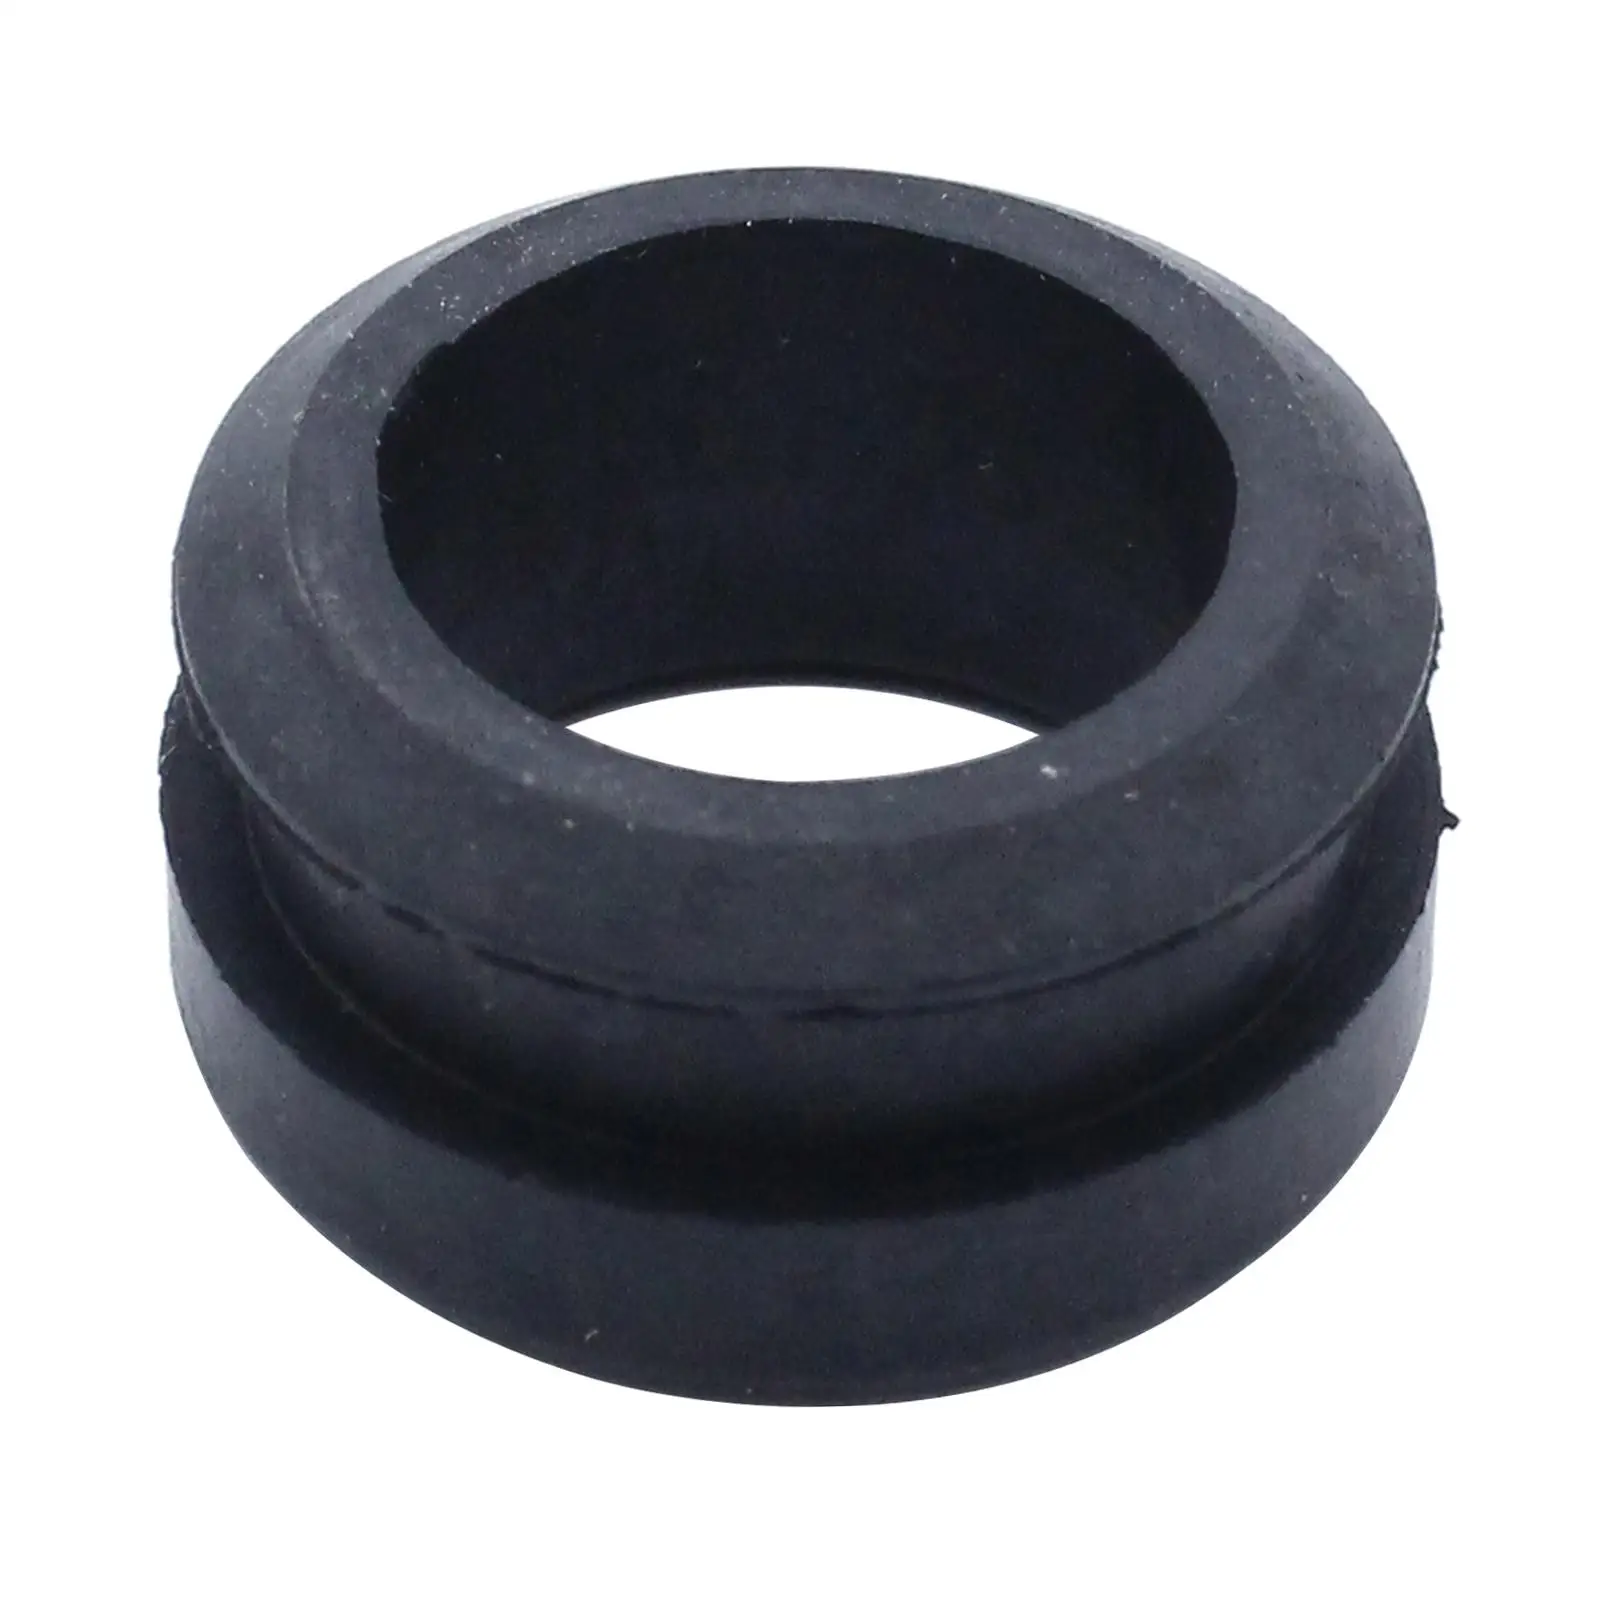 Rubber Breather Grommets Valve Cover Grommets Fit Valve Covers